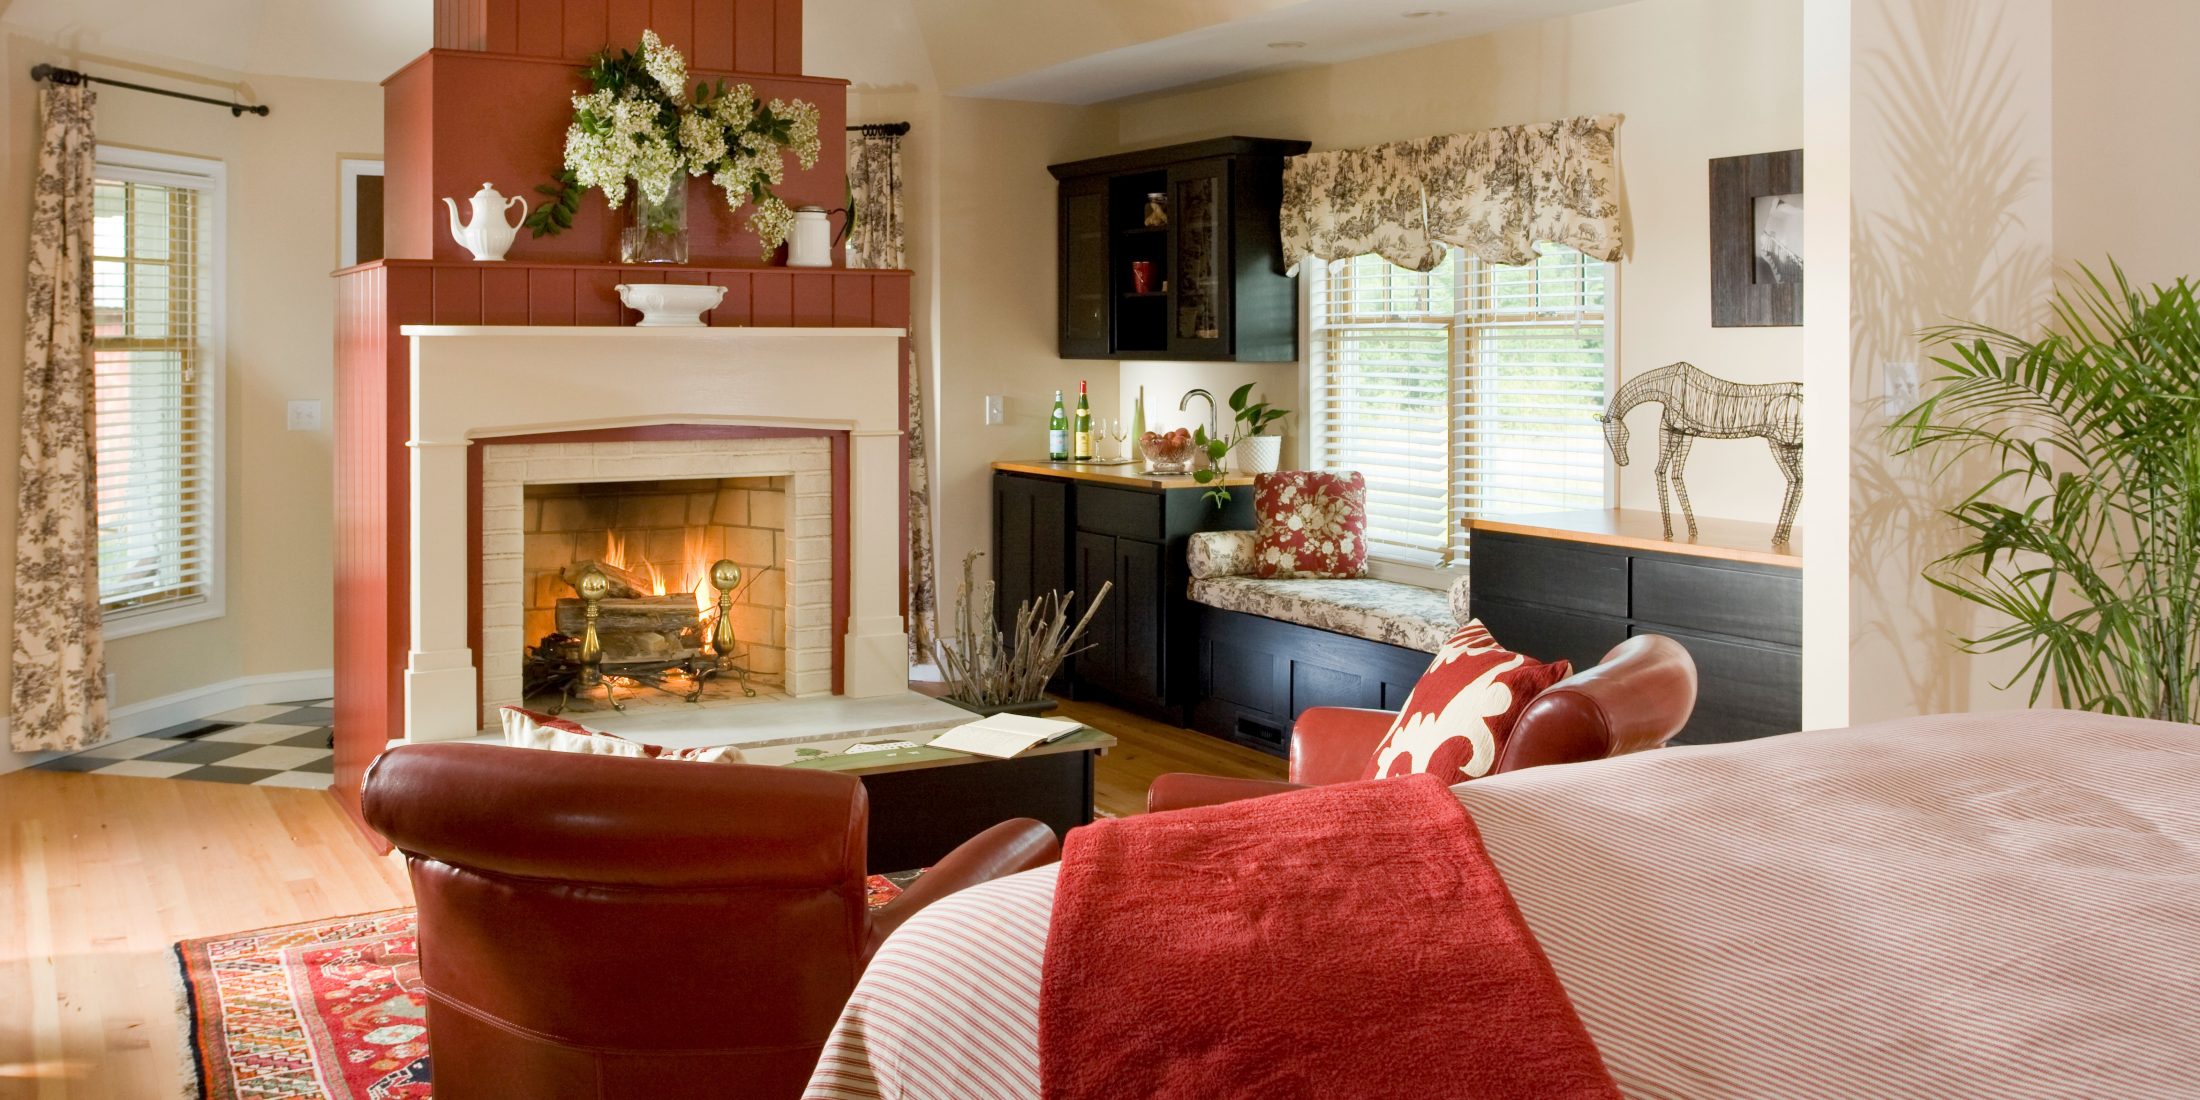 Brampton-Marley's bed and fireplace